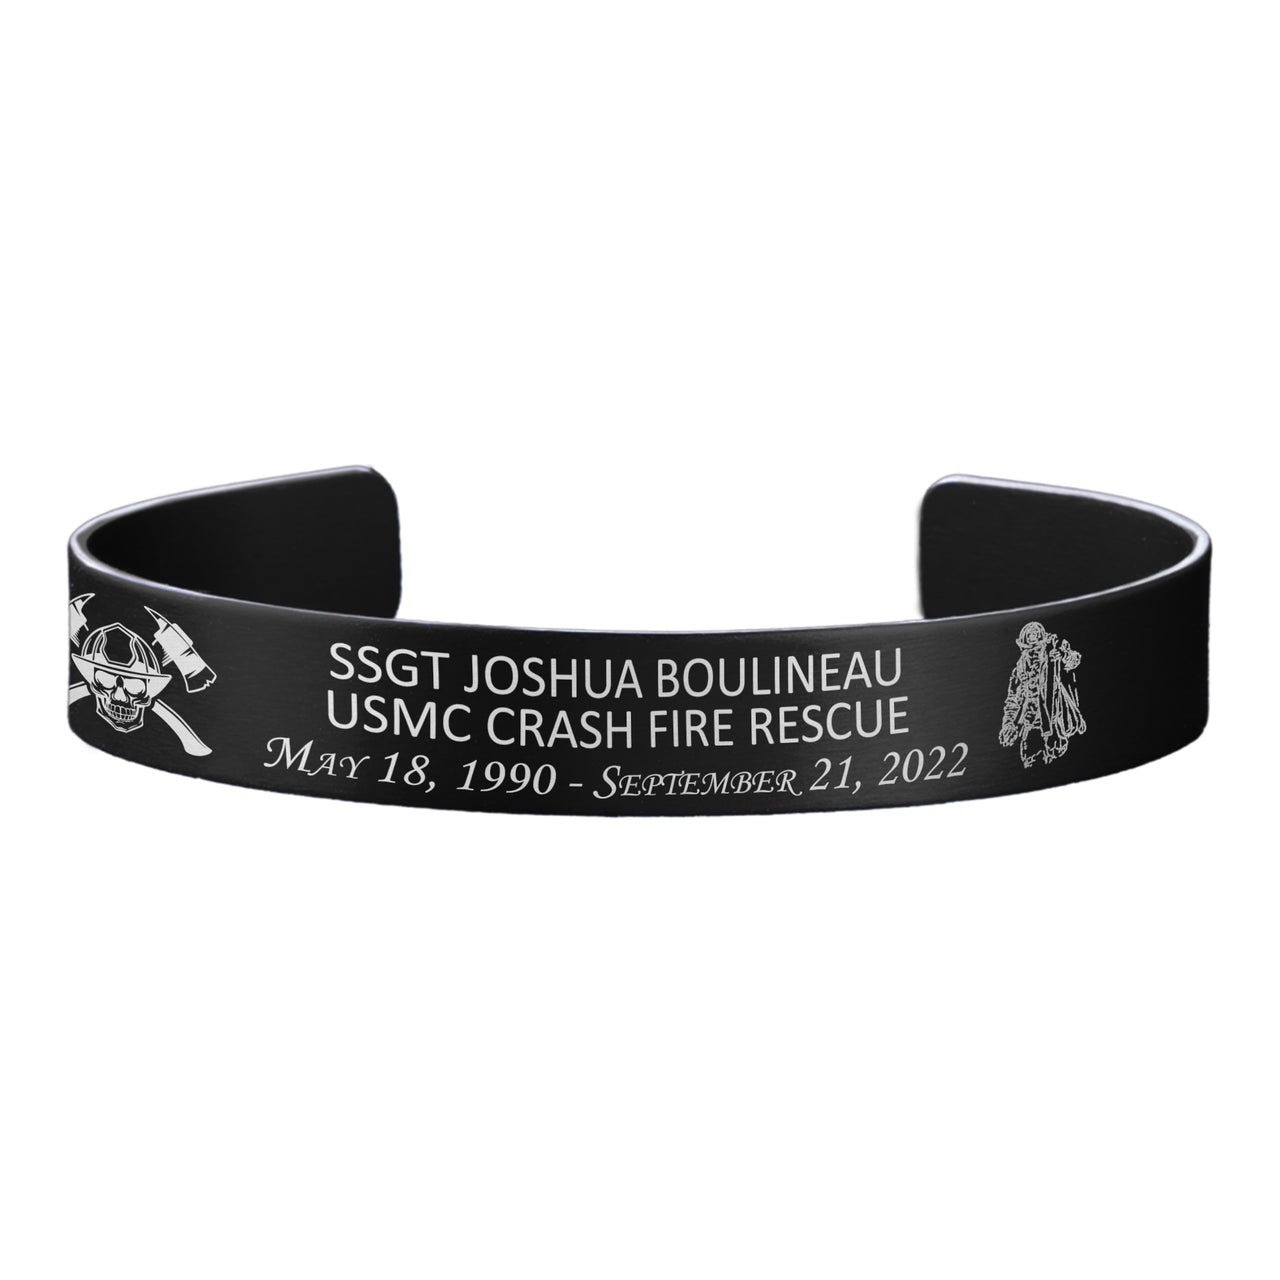 SSGT Joshua S. Boulineau Memorial Band – Hosted by the Norton Family